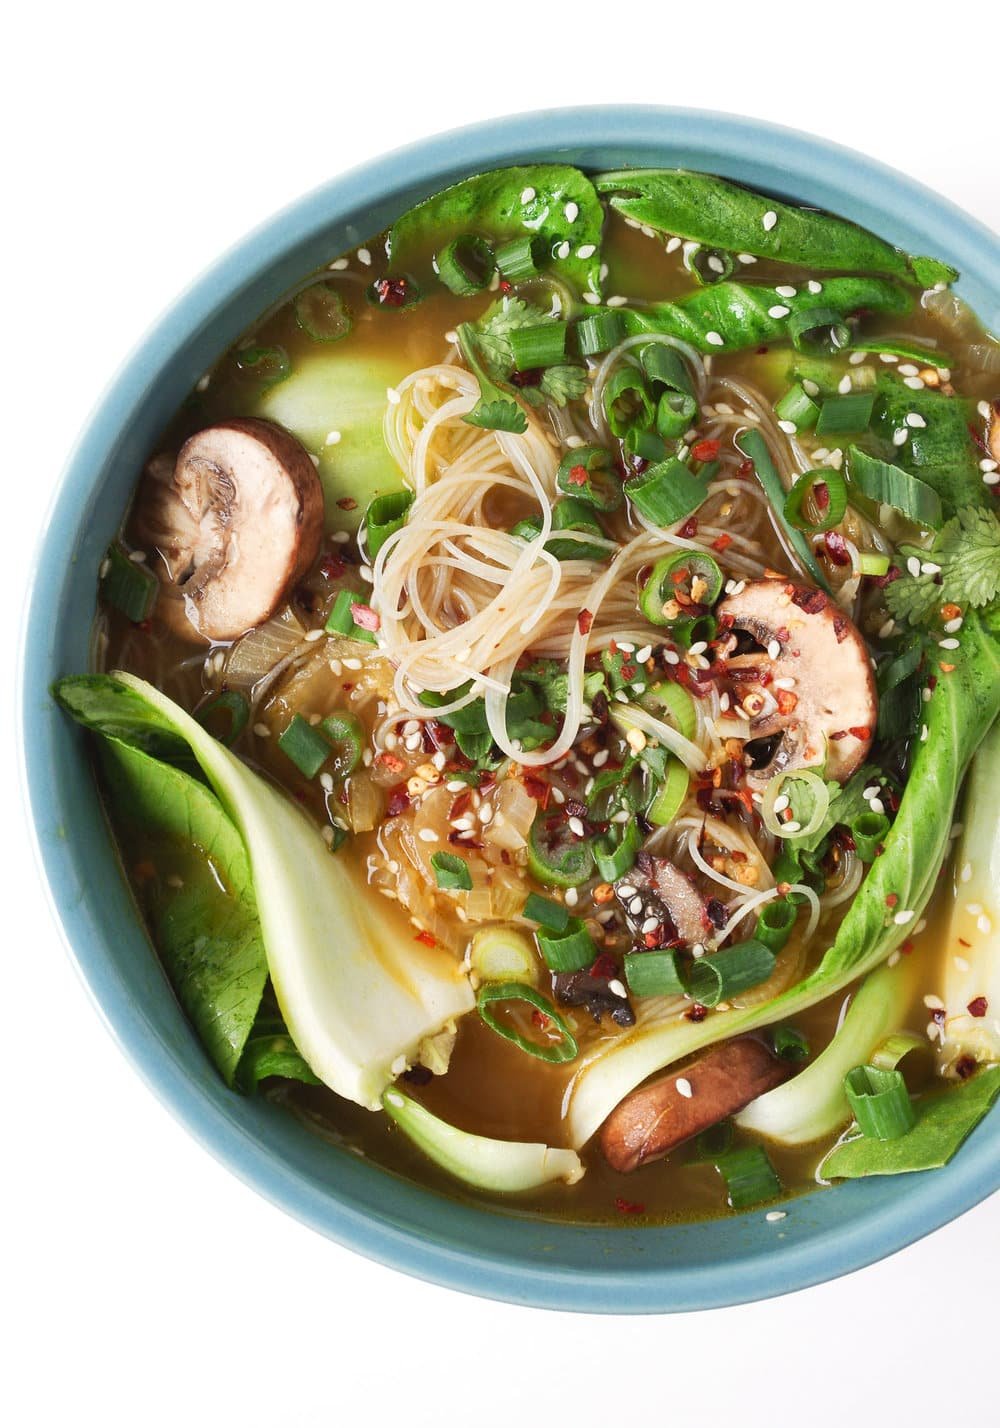 10 Easy Dinners for Busy Nights - Ginger Garlic Noodle Soup with Bok Choy